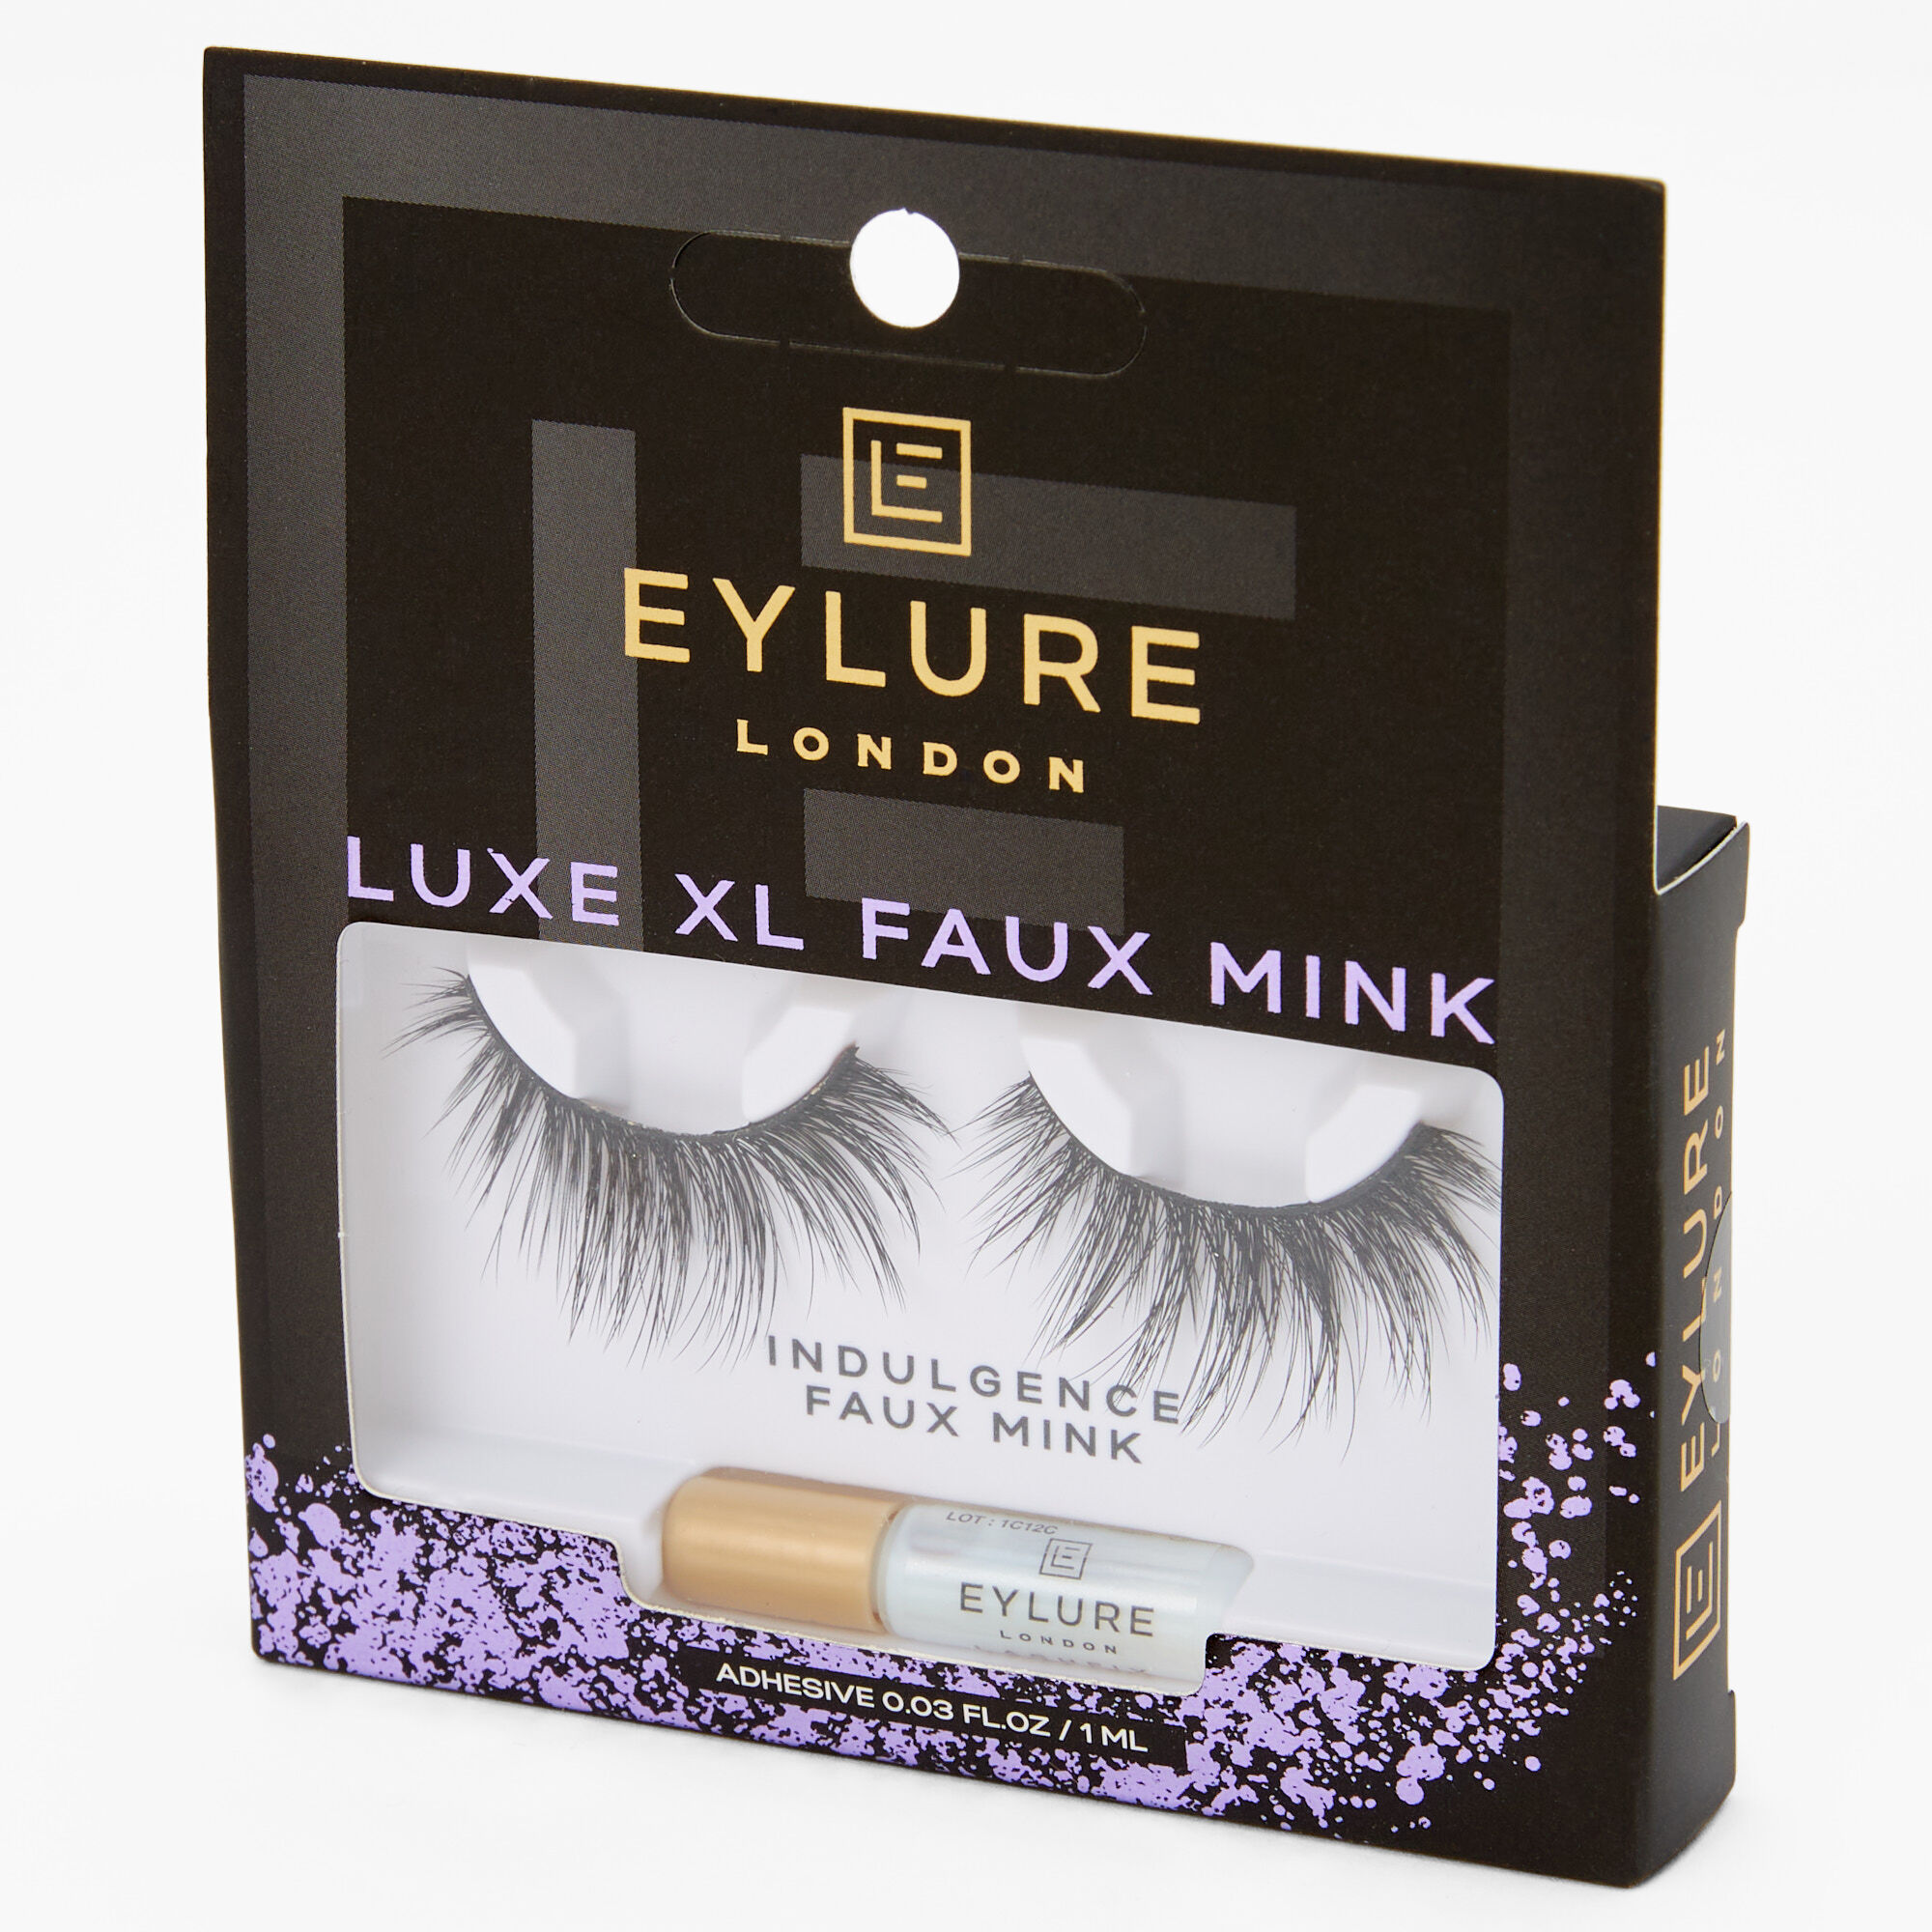 View Claires Eylure Luxe Xl Faux Mink Eyelashes Indulgence Black information